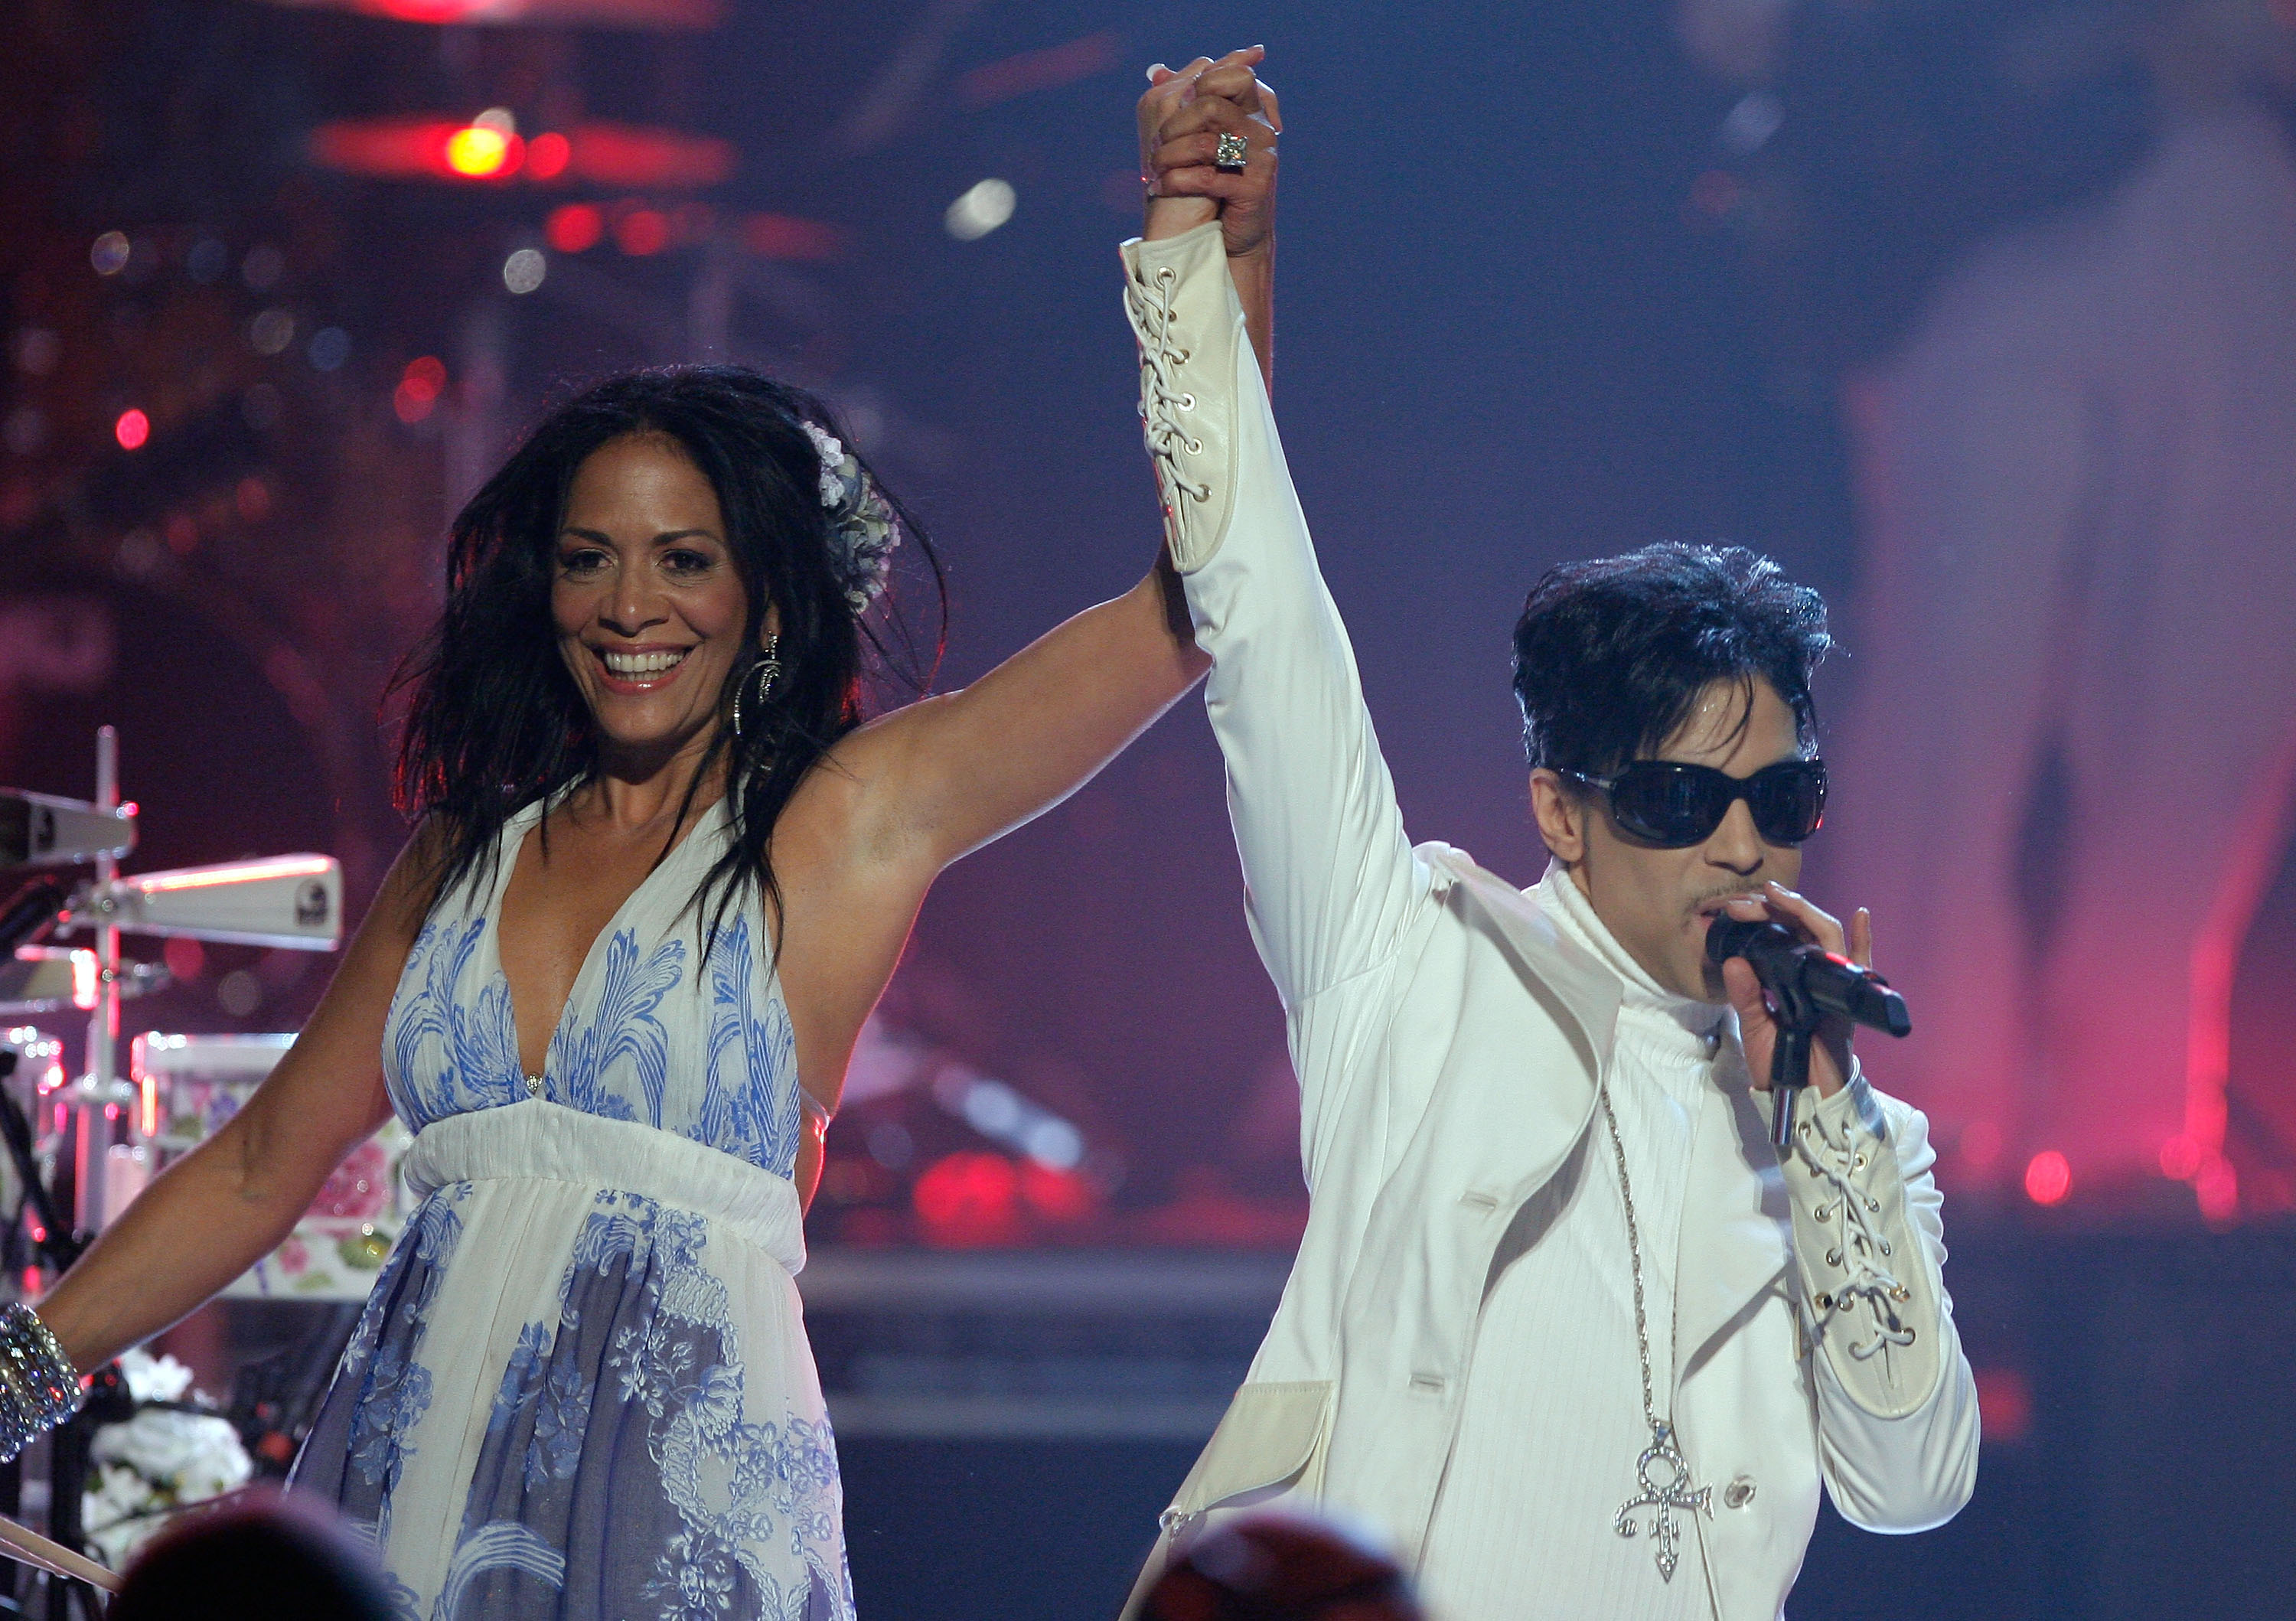 Prince and Sheila E. performed together during the ALMA Awards at the Pasad...